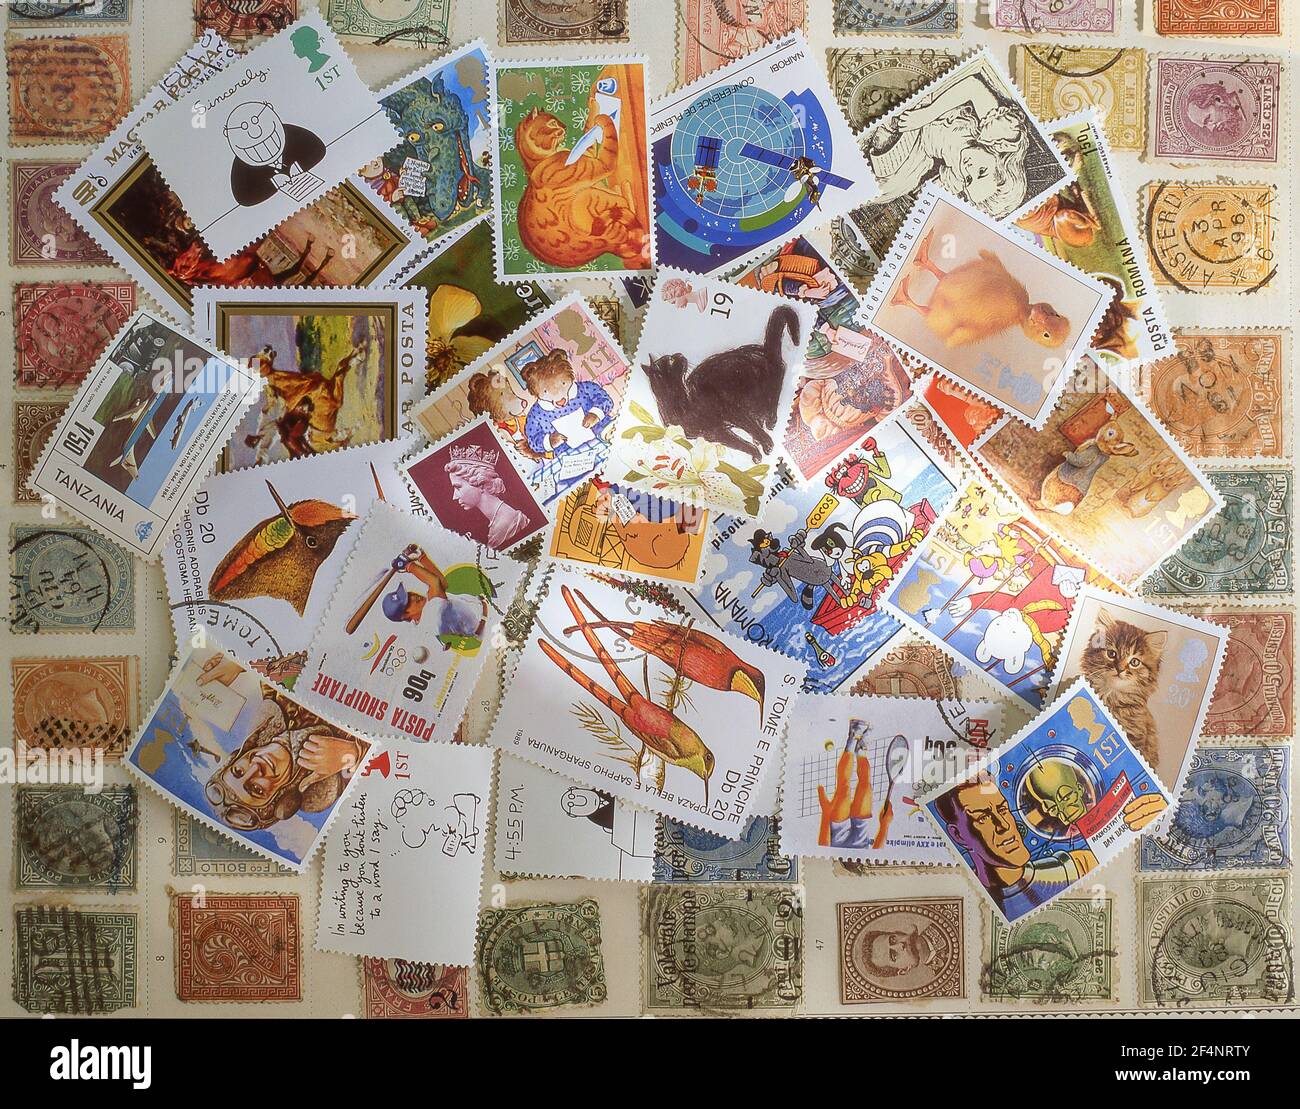 Collection of stamps in studio setting, Berkshire, England, United Kingdom Stock Photo